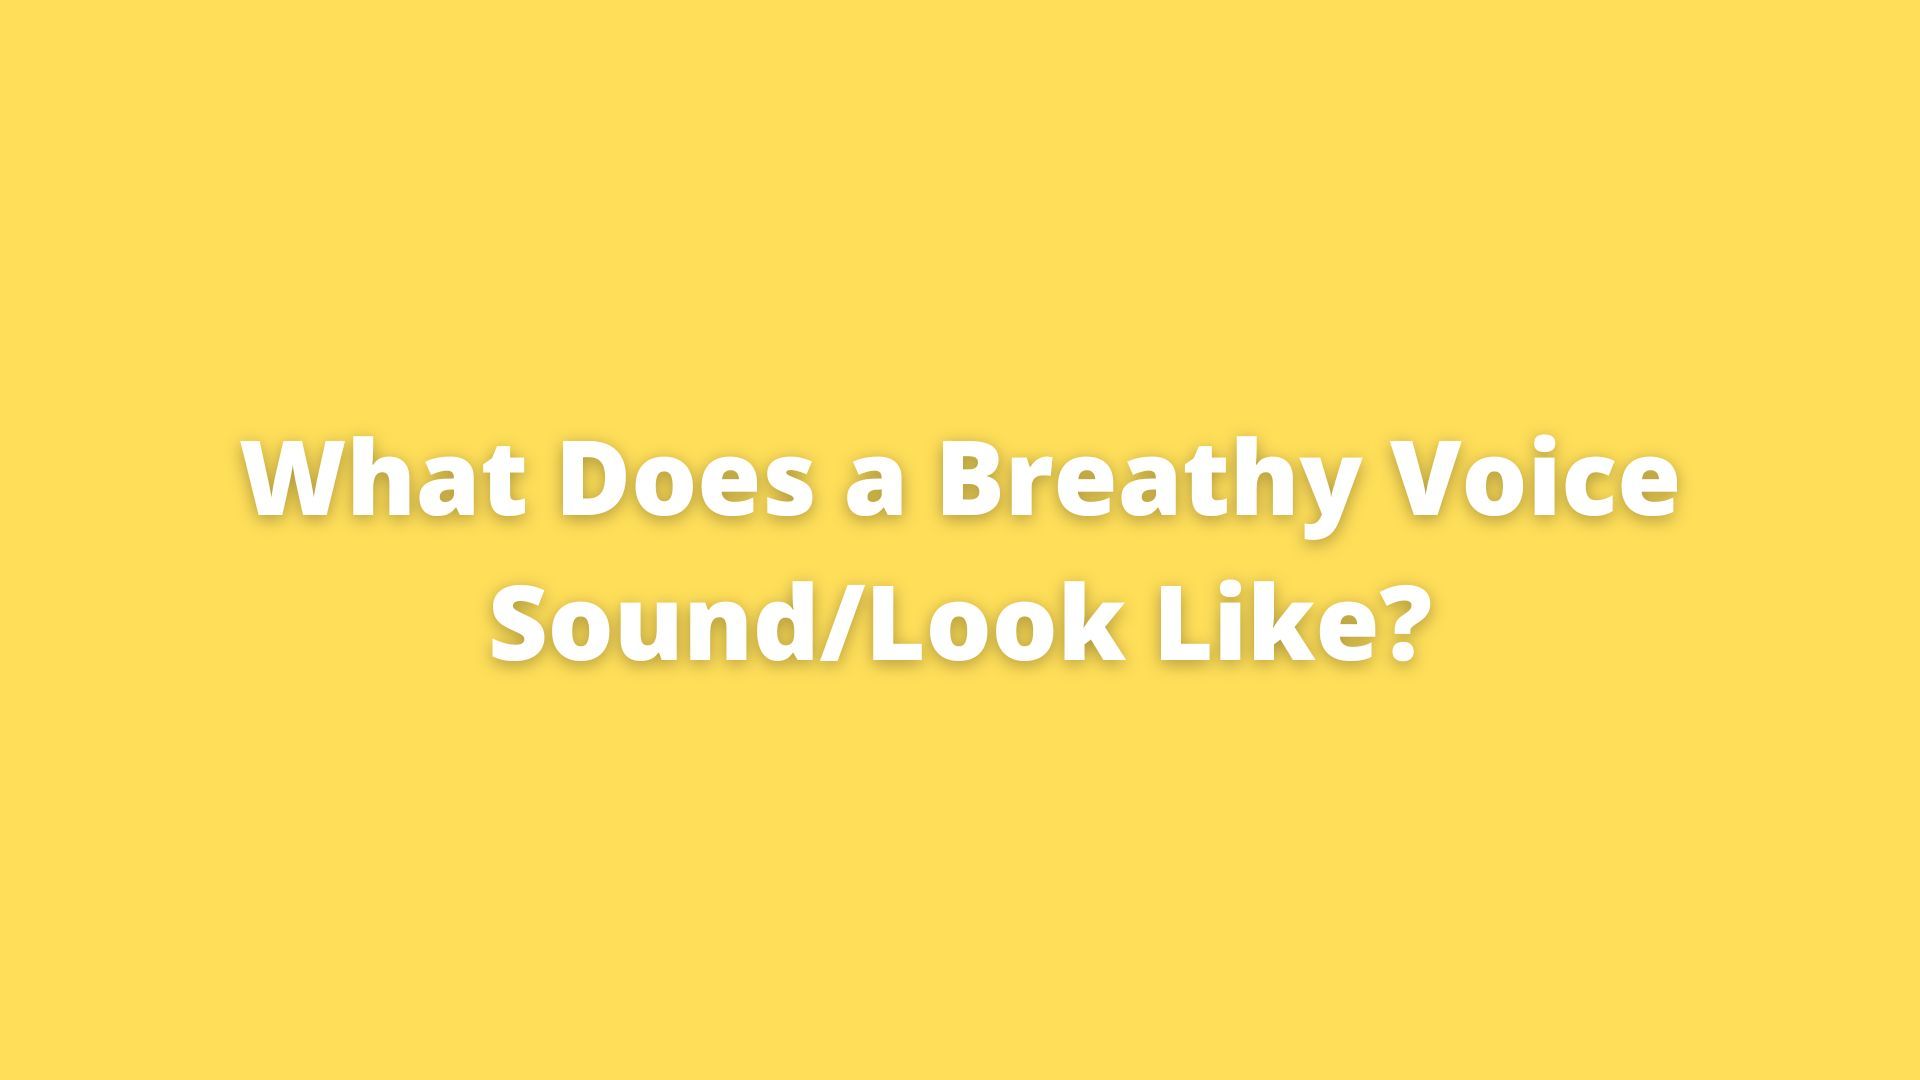 What Does a Breathy Voice Sound Like